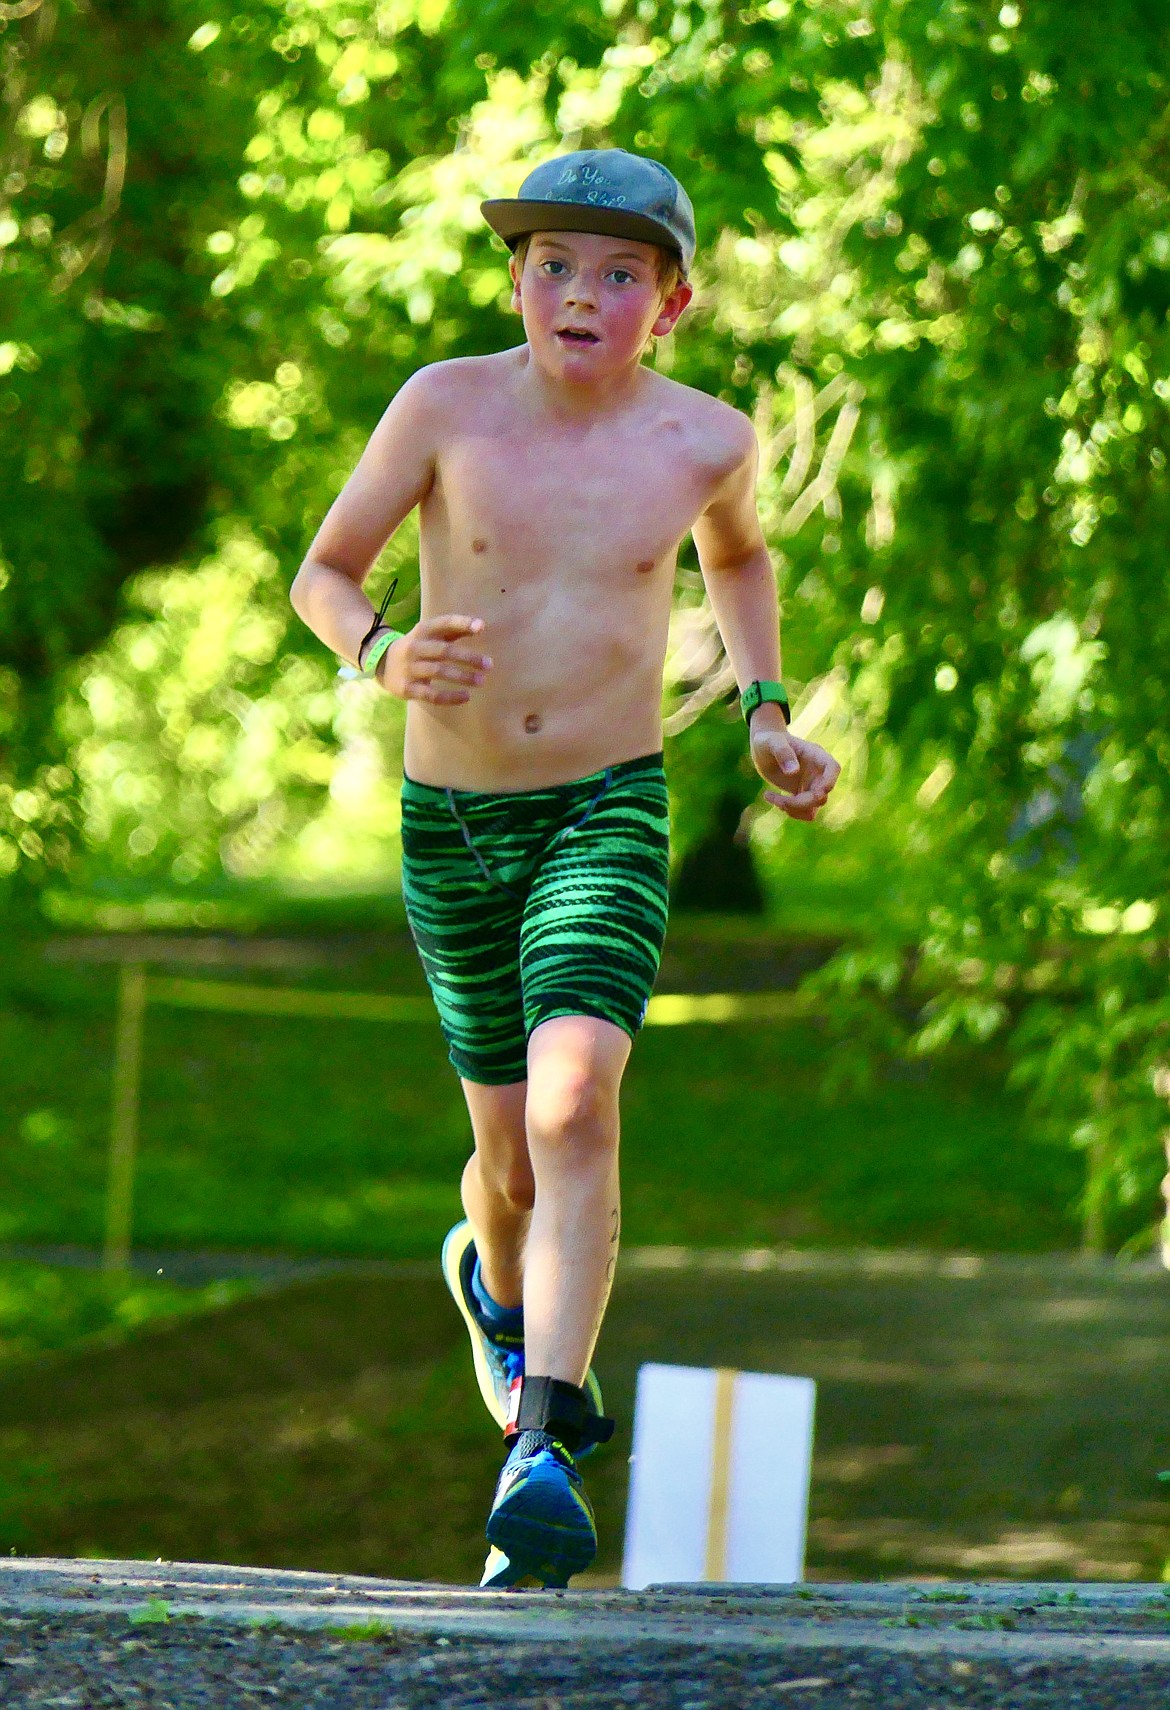 Porter Shehan, 11, approaches the finish of the Logan Health Kids Triathlon at Woodland Park in Kalispell on Saturday, July 16. Sheehan, of Whitefish, finished second overall in his age group. (Matt Baldwin/Daily Inter Lake)